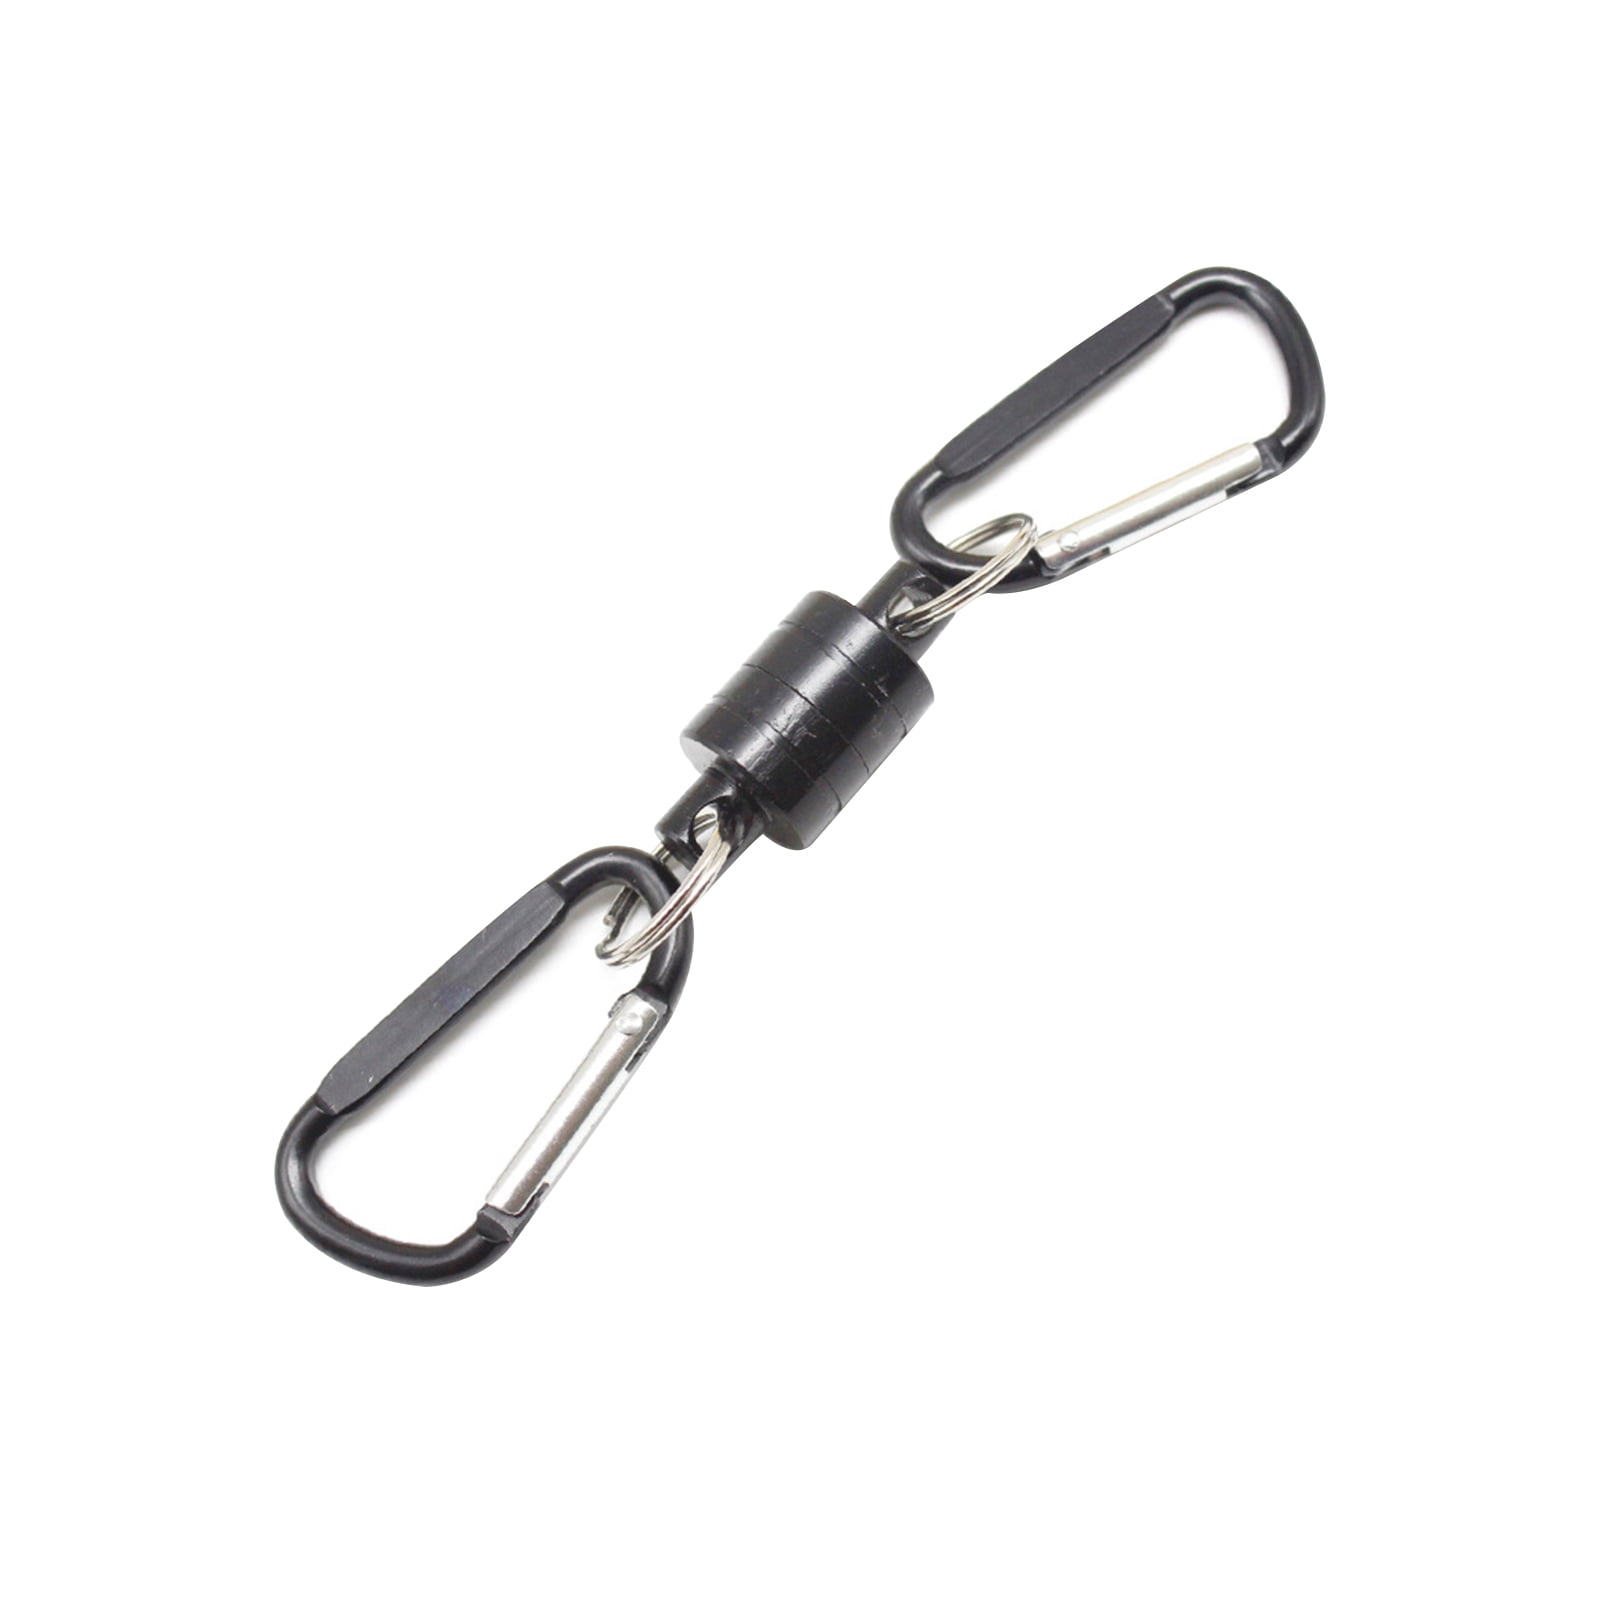 Details about   10x Safety Buckle Hook Climbing Button Carabiner Outdoor Sports Aluminium Alloy 